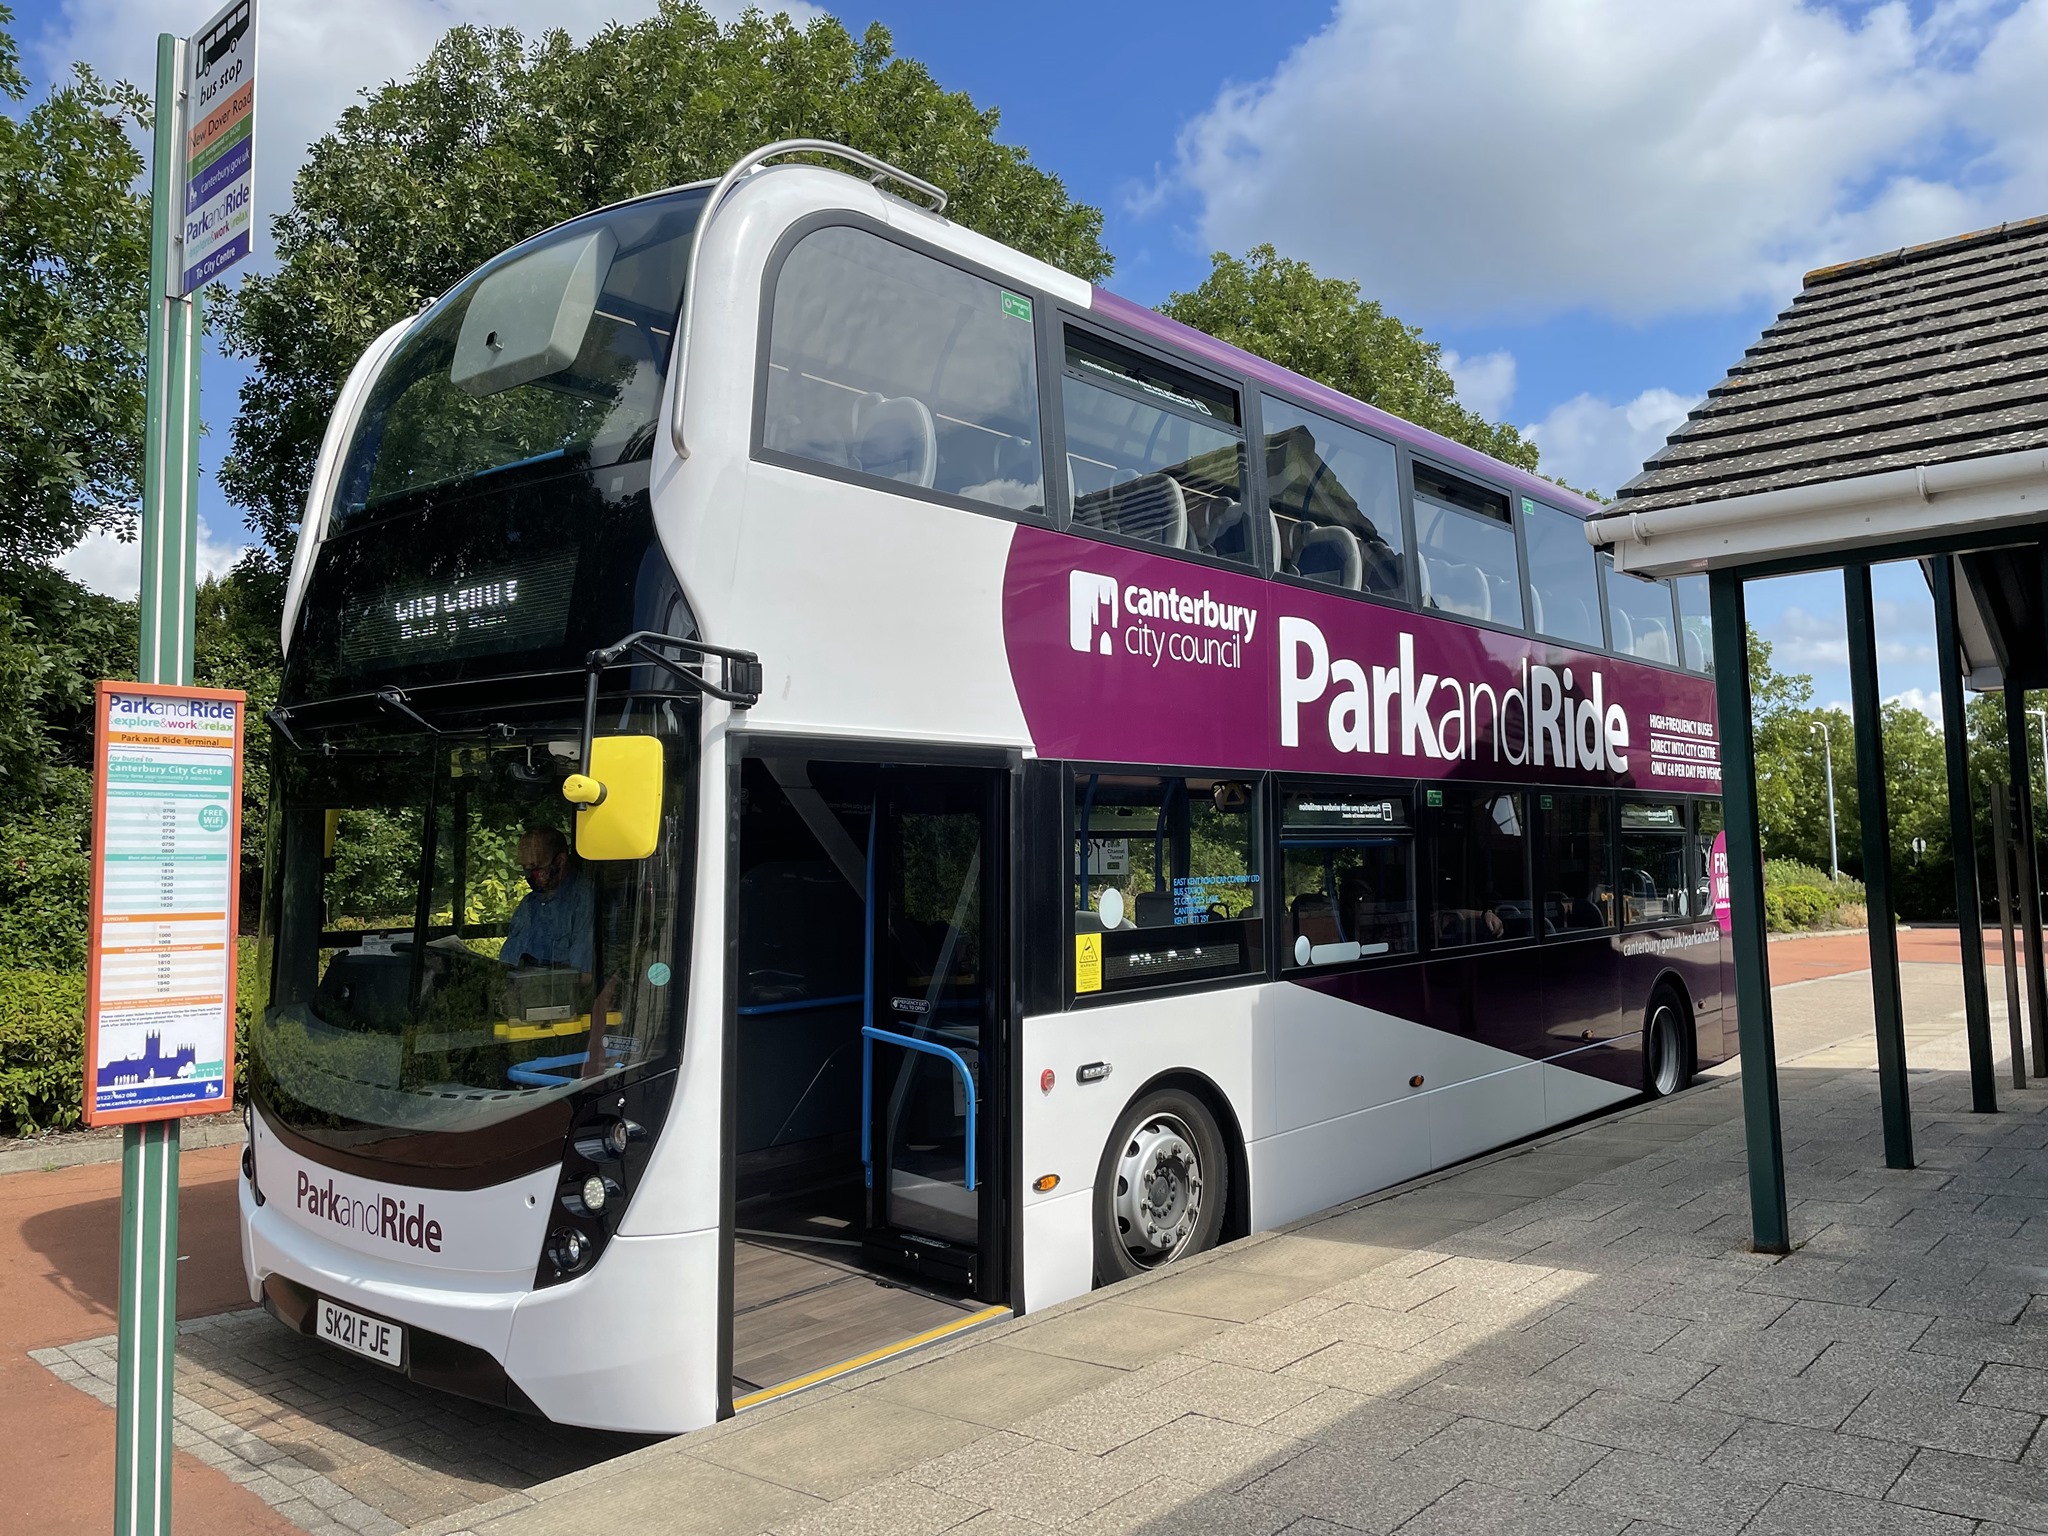 Park and ride to resume at Sturry Road